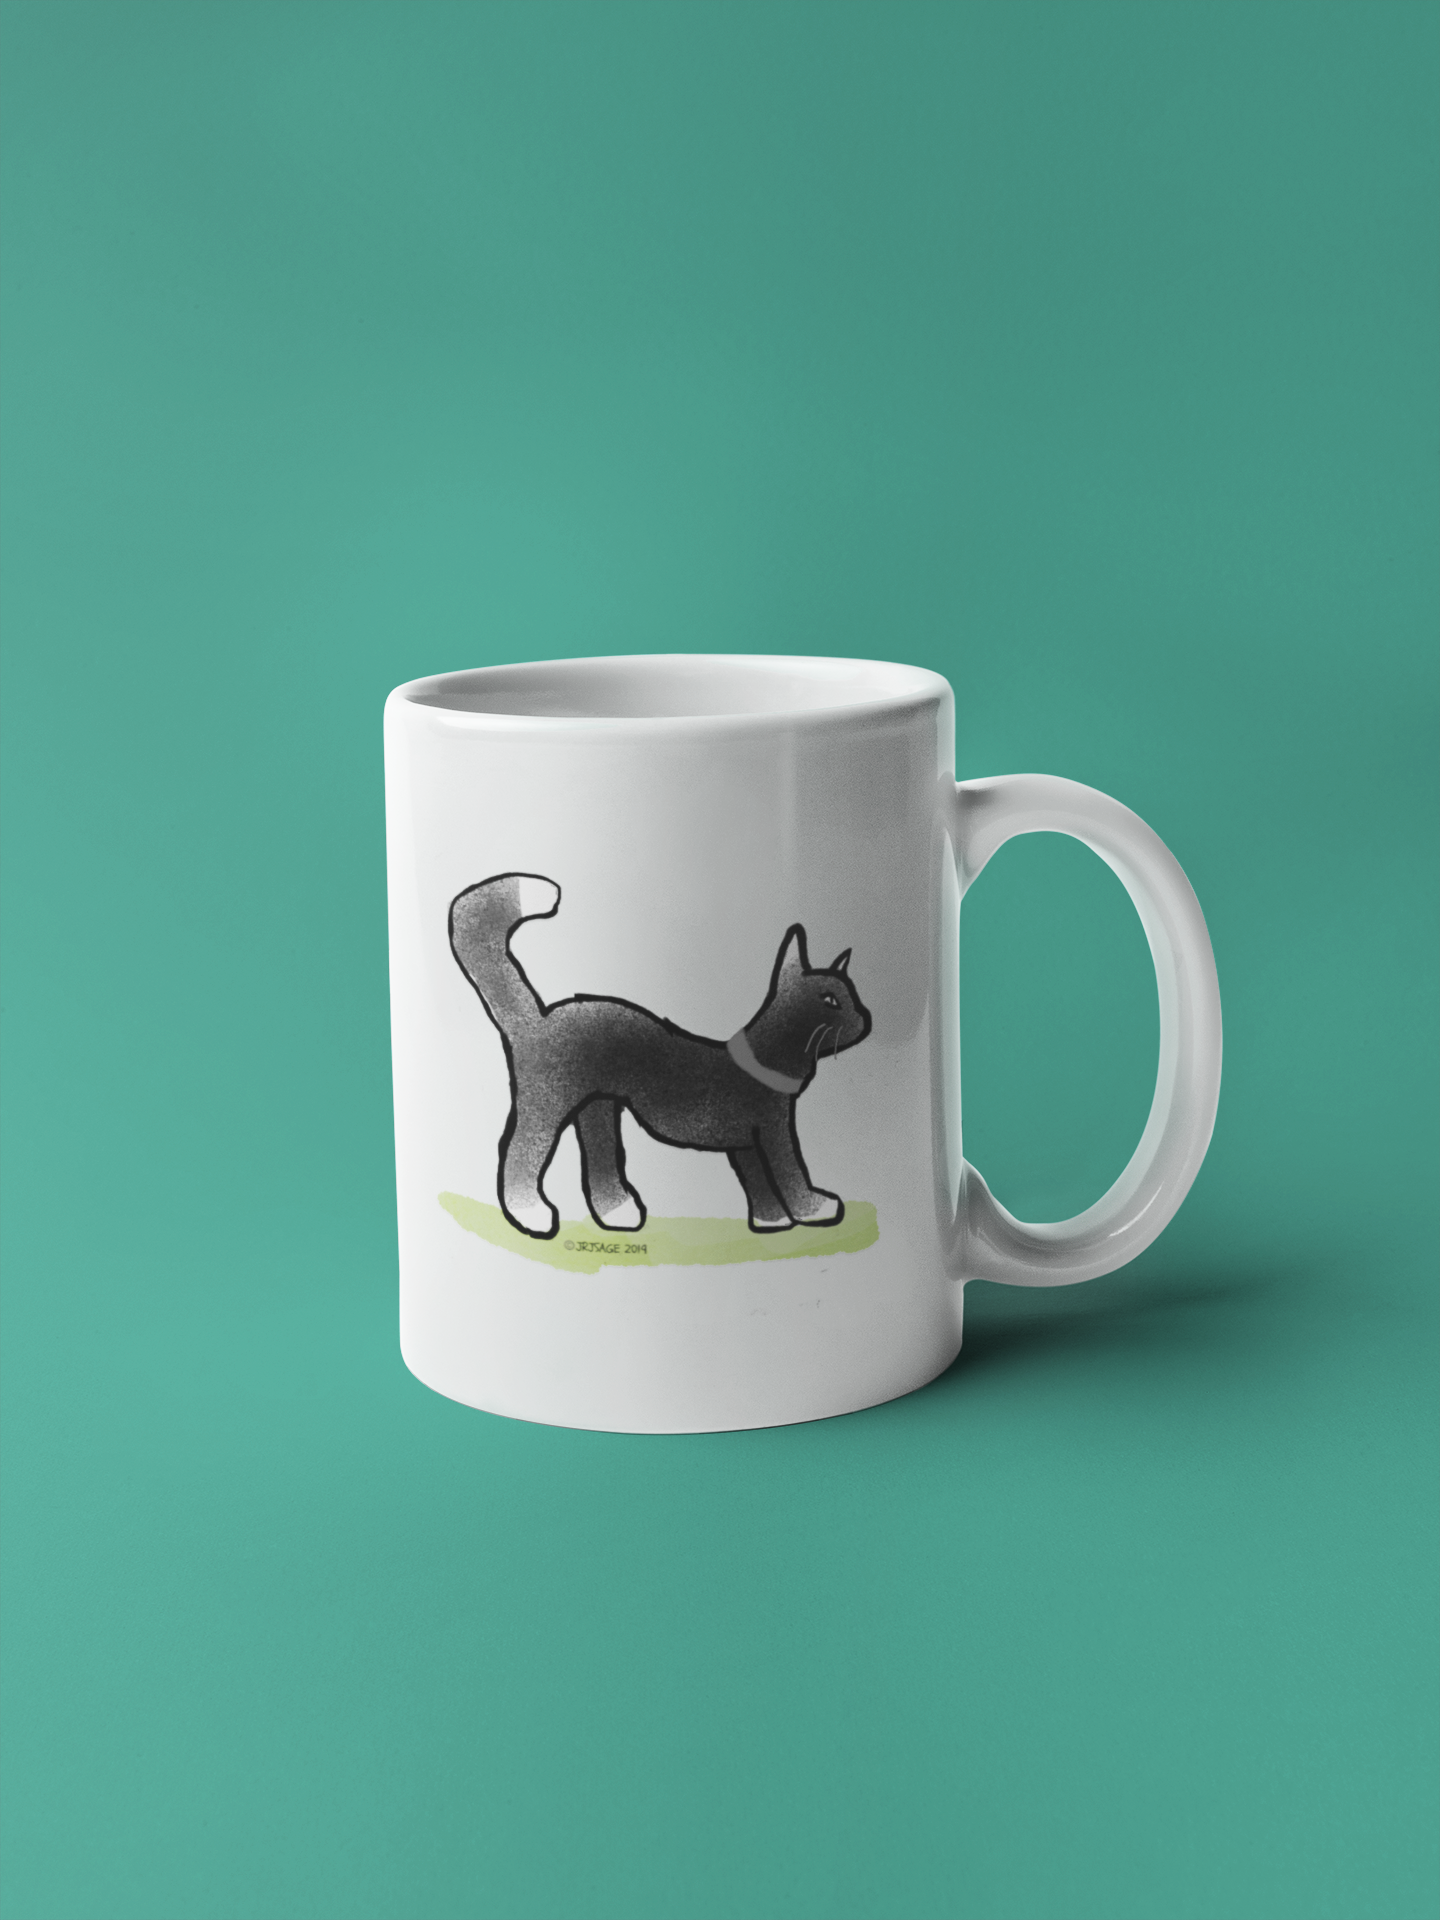 Black Cat Mug - A White Ceramic Hector and Bone coffee Mug with a cute Black Cat with white bits illustration